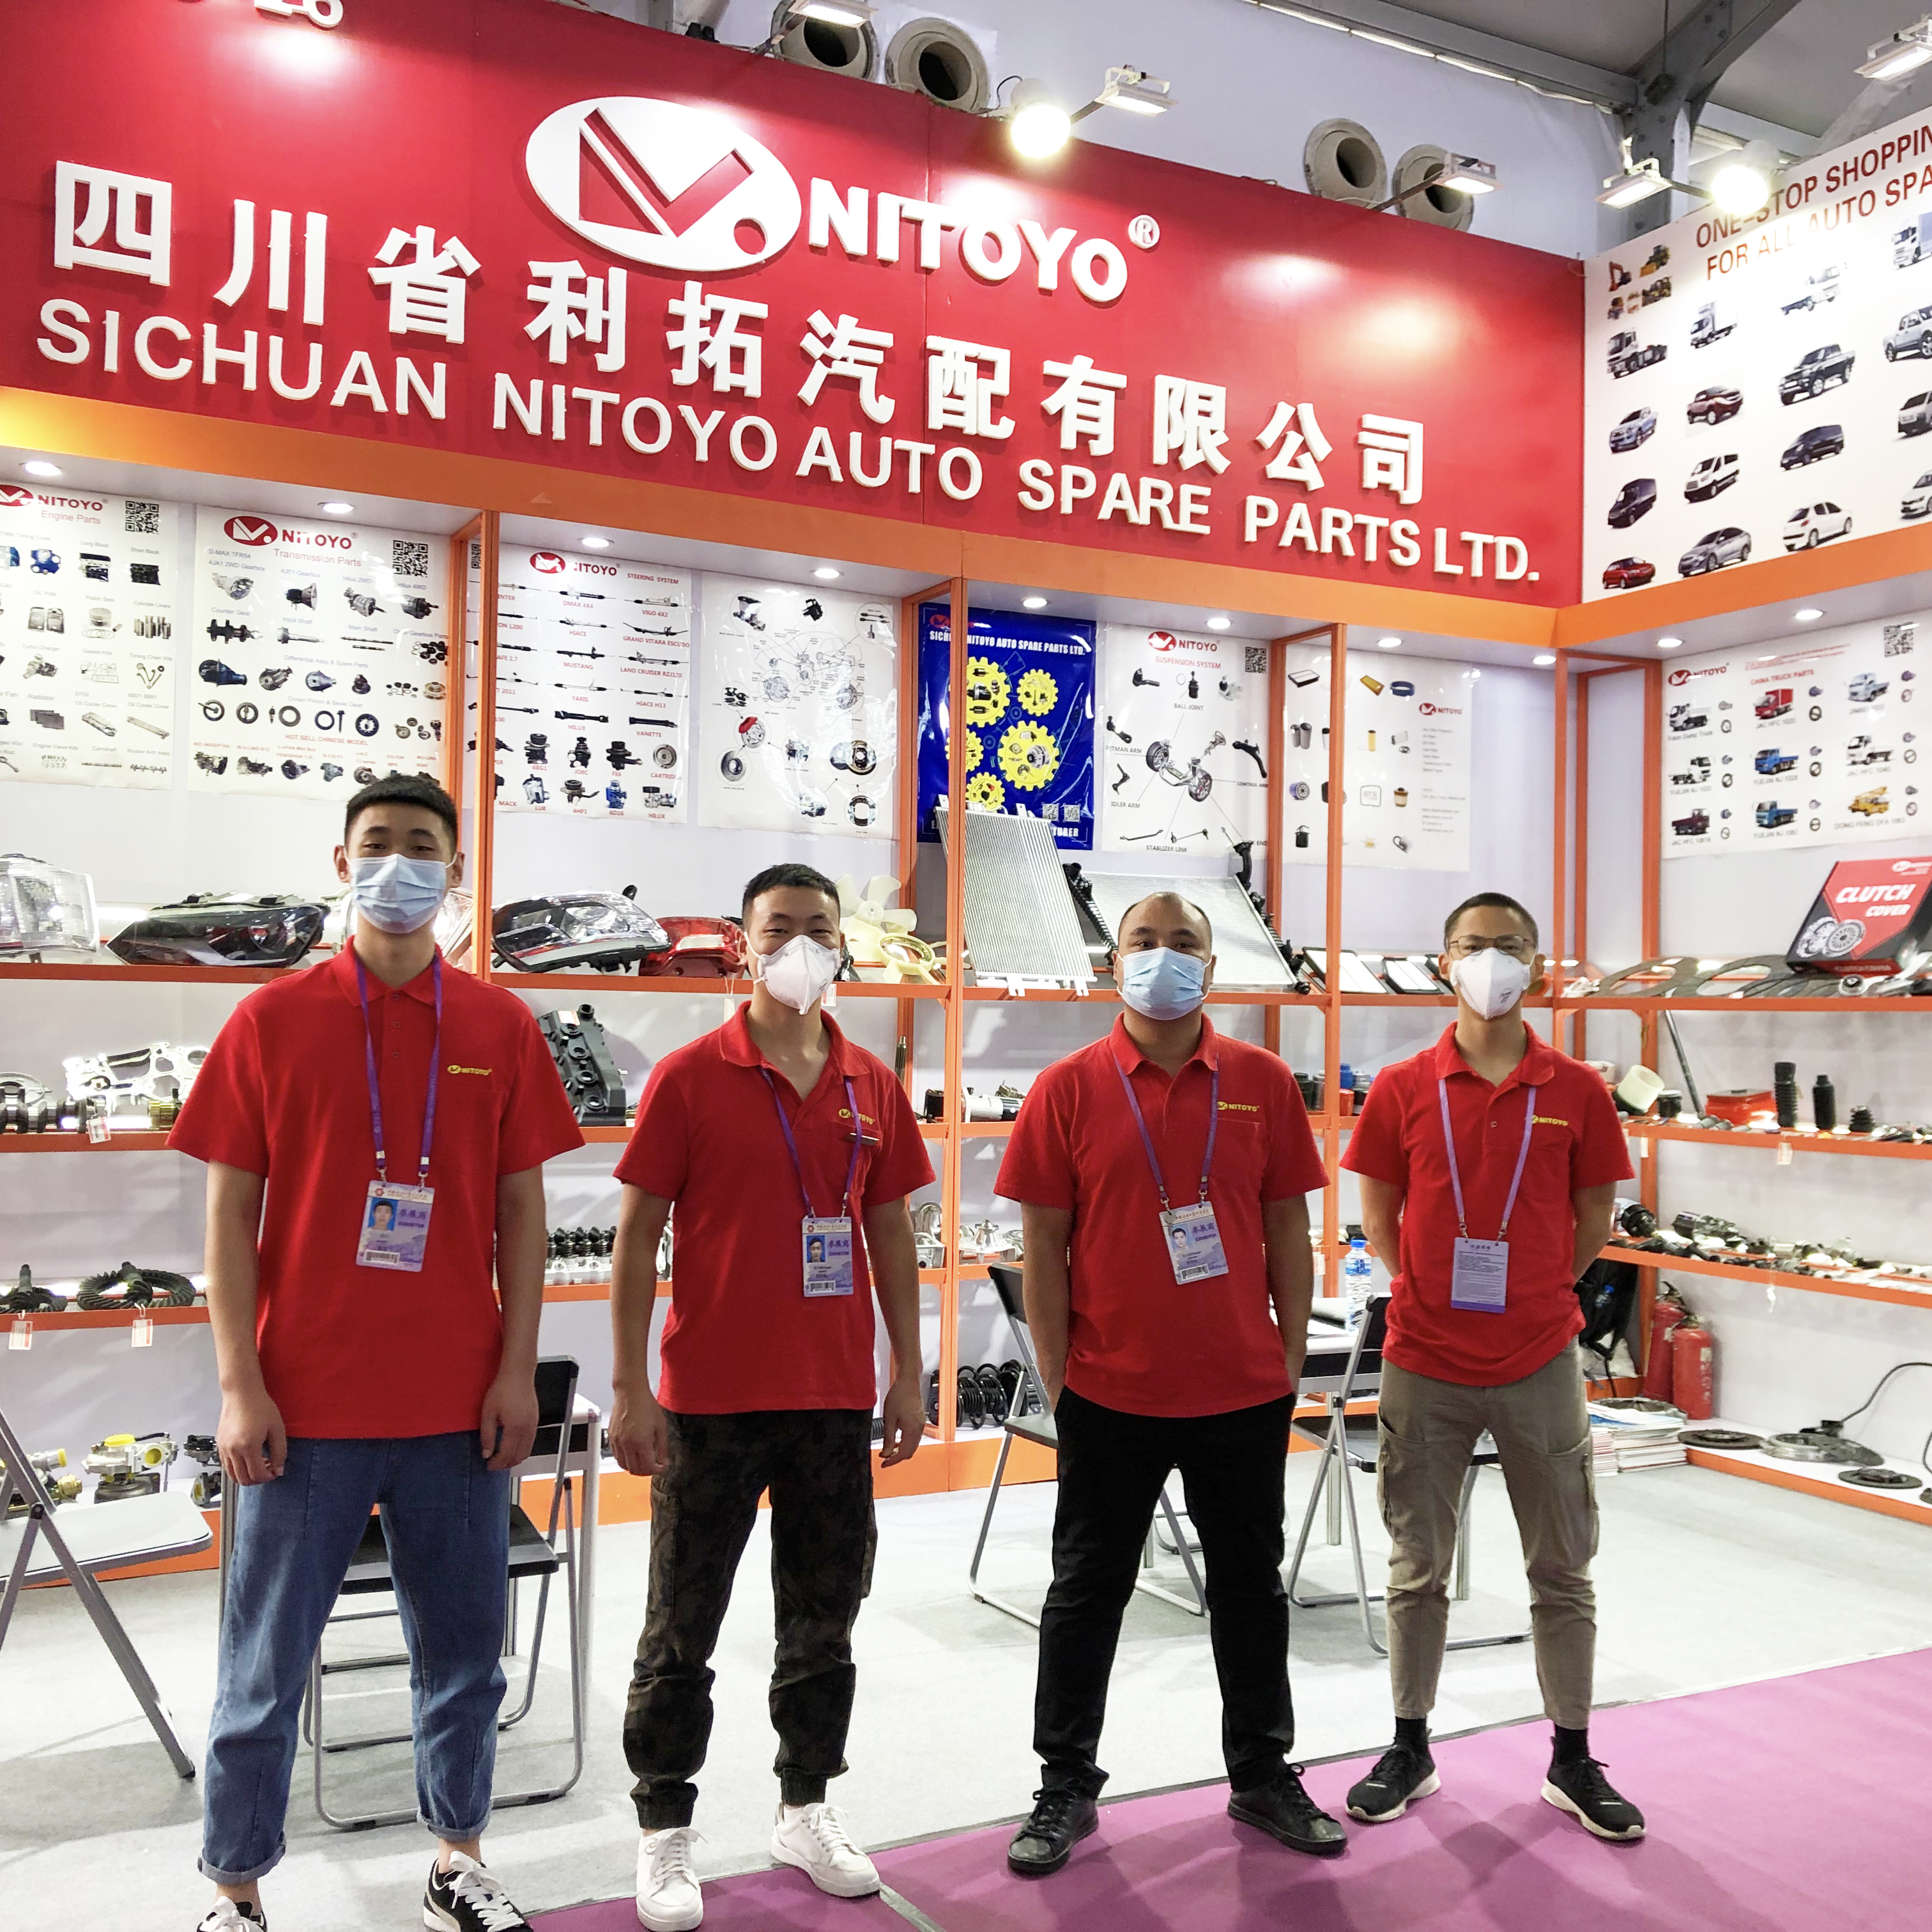 NITOYO IN THE 130TH CANTON FAIR ENDED PERFECTLY